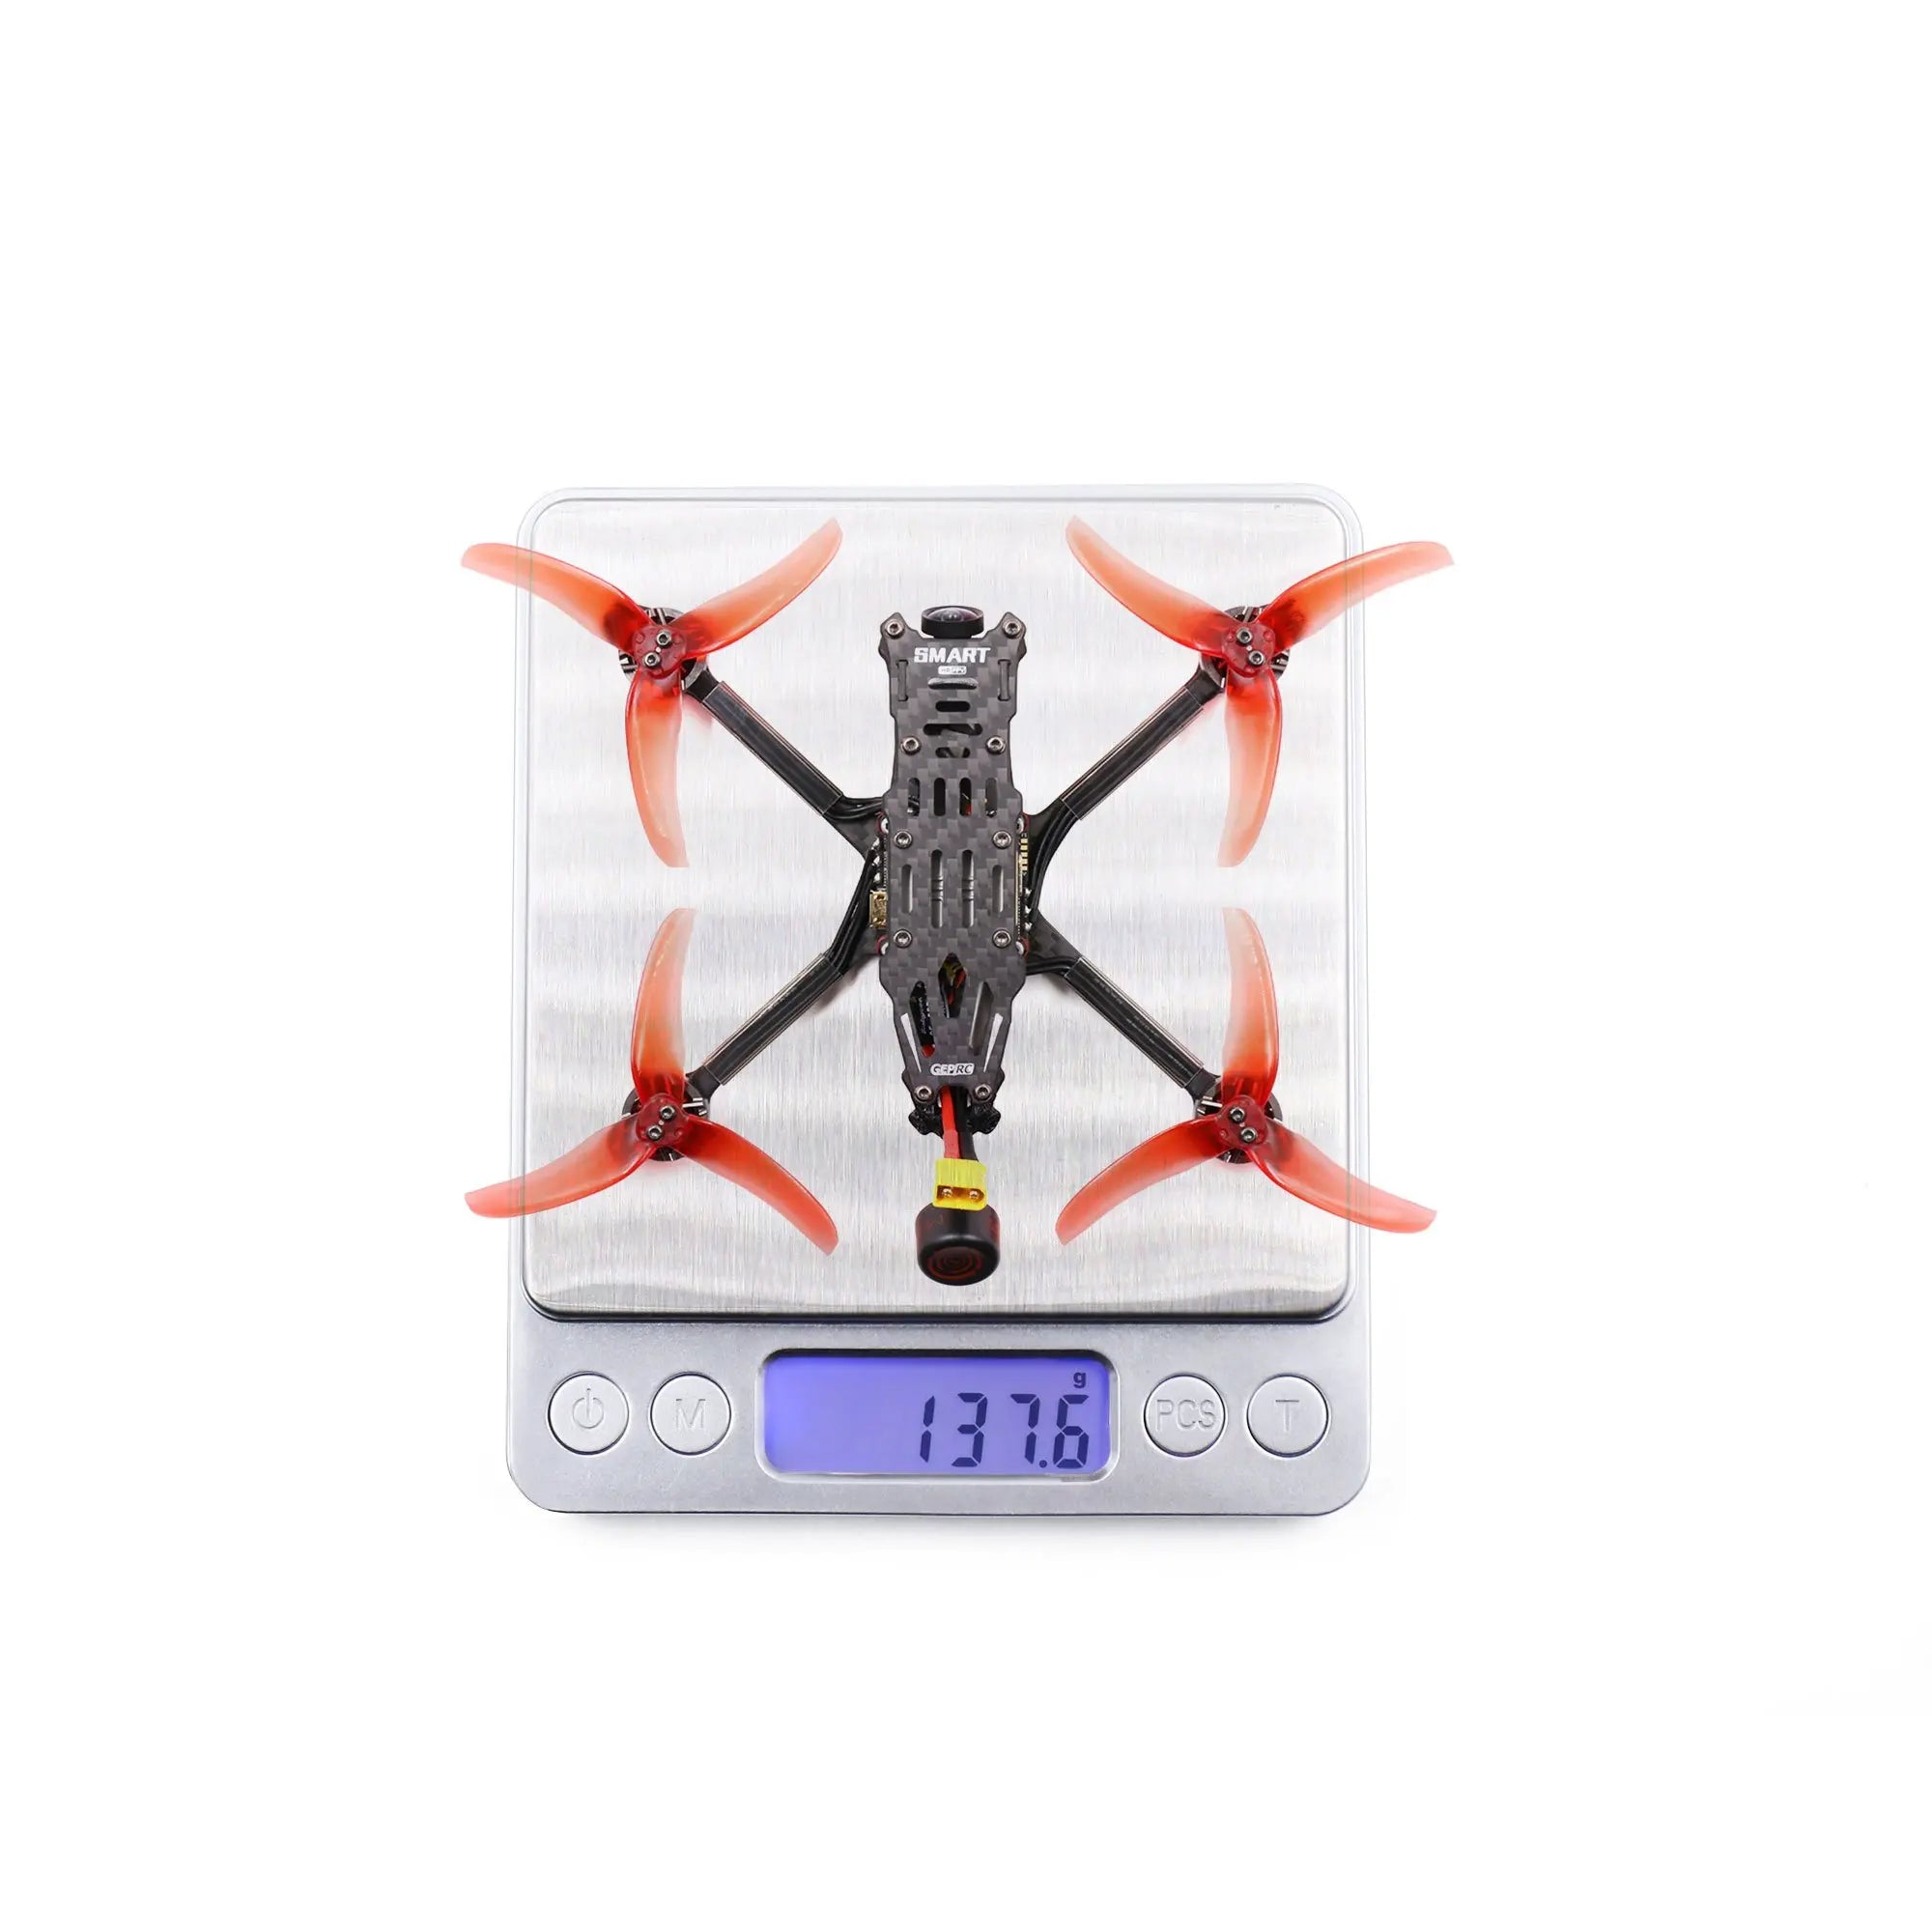 GEPRC SMART 35 FPV Drone, the GepRC Phantom 35 HD Freestyle is an impressive product that delivers high-quality video